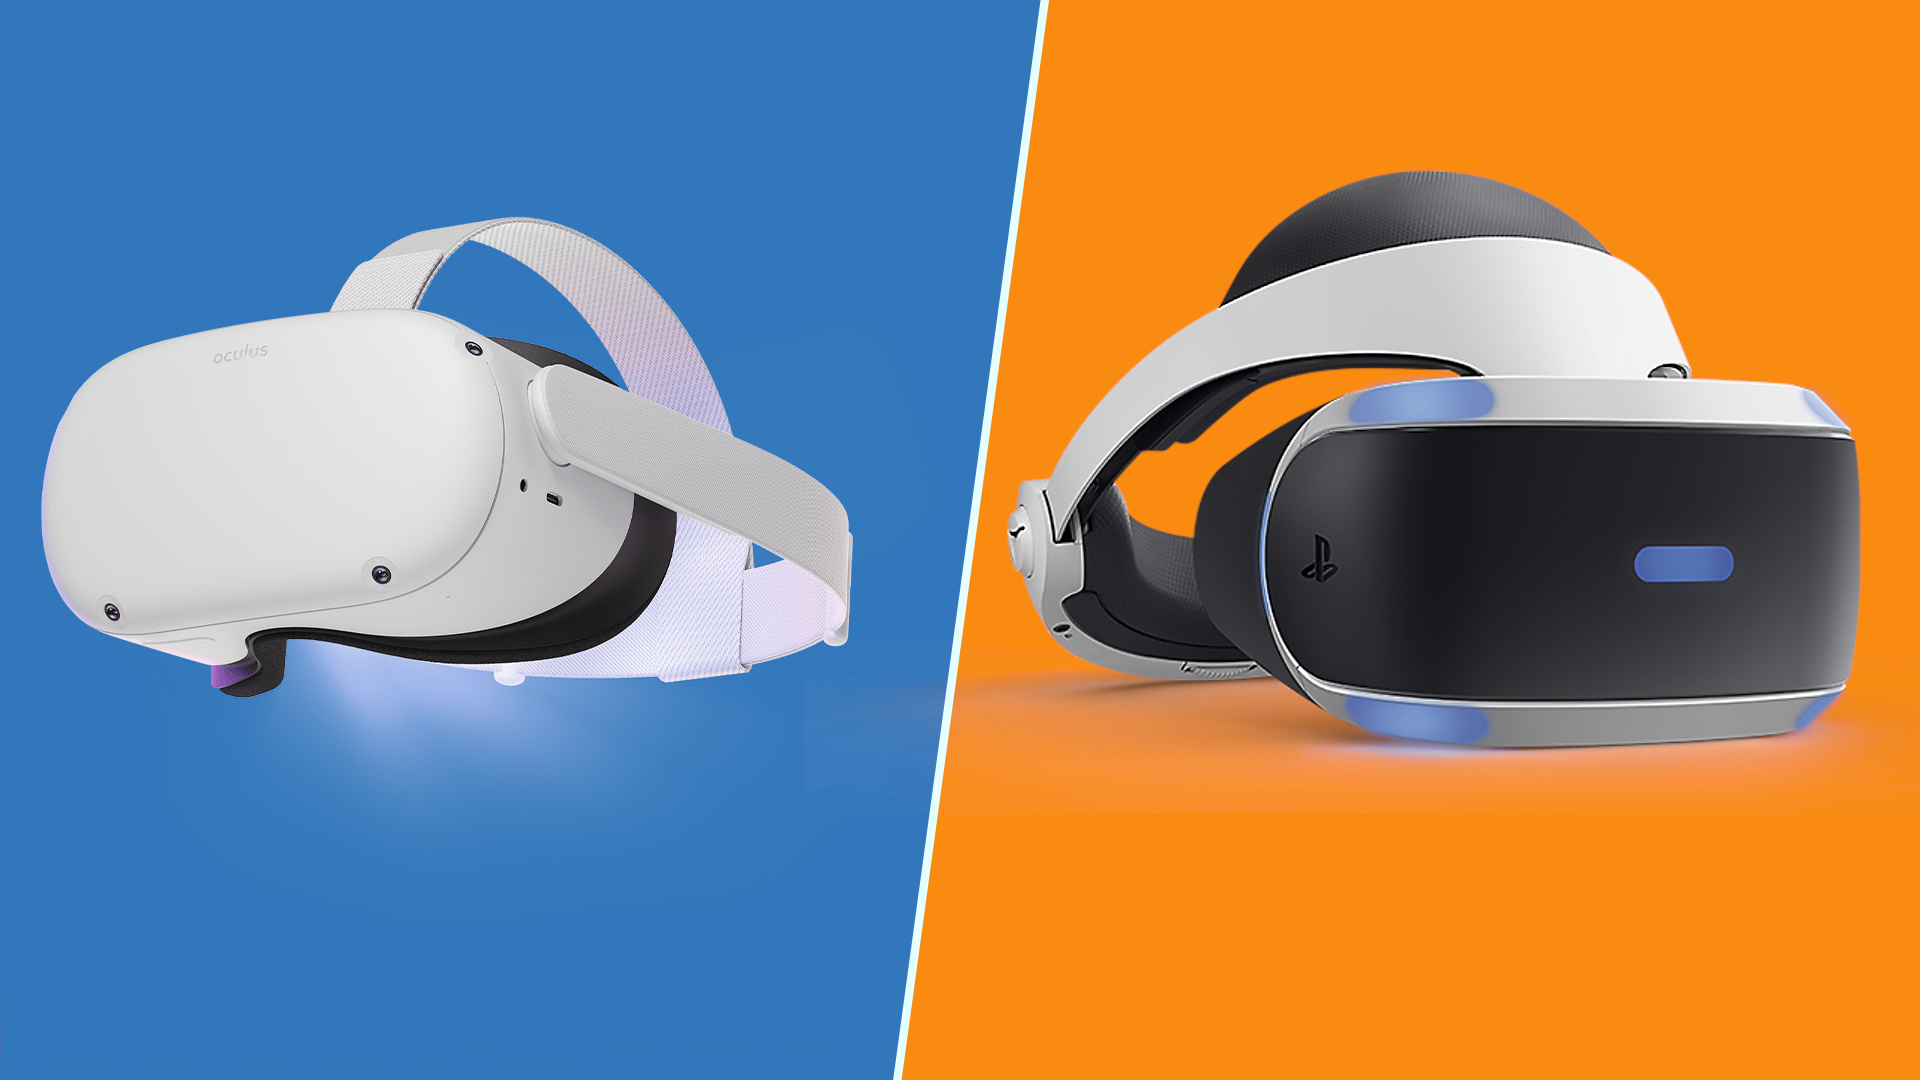 Oculus Quest 2 vs. PlayStation VR: Which VR headset should you buy? | Space